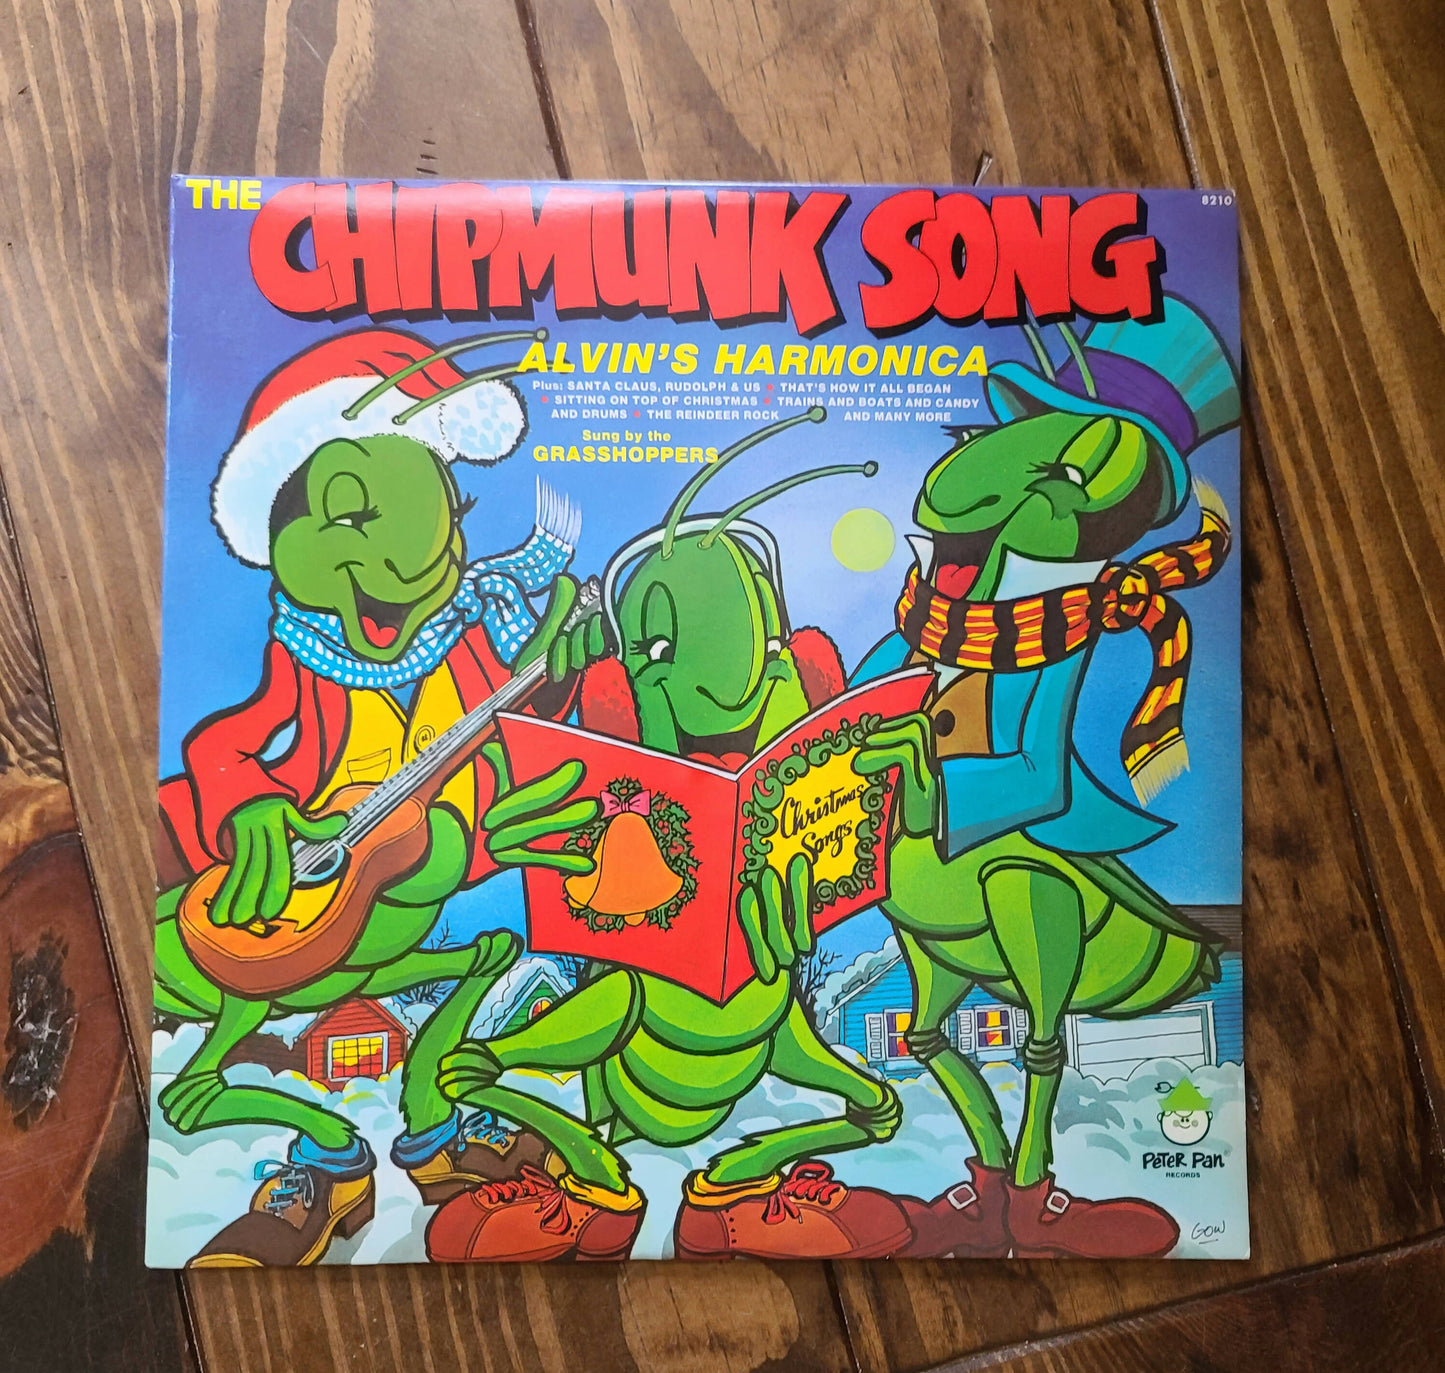 The Chipmunk Song Christmas Record